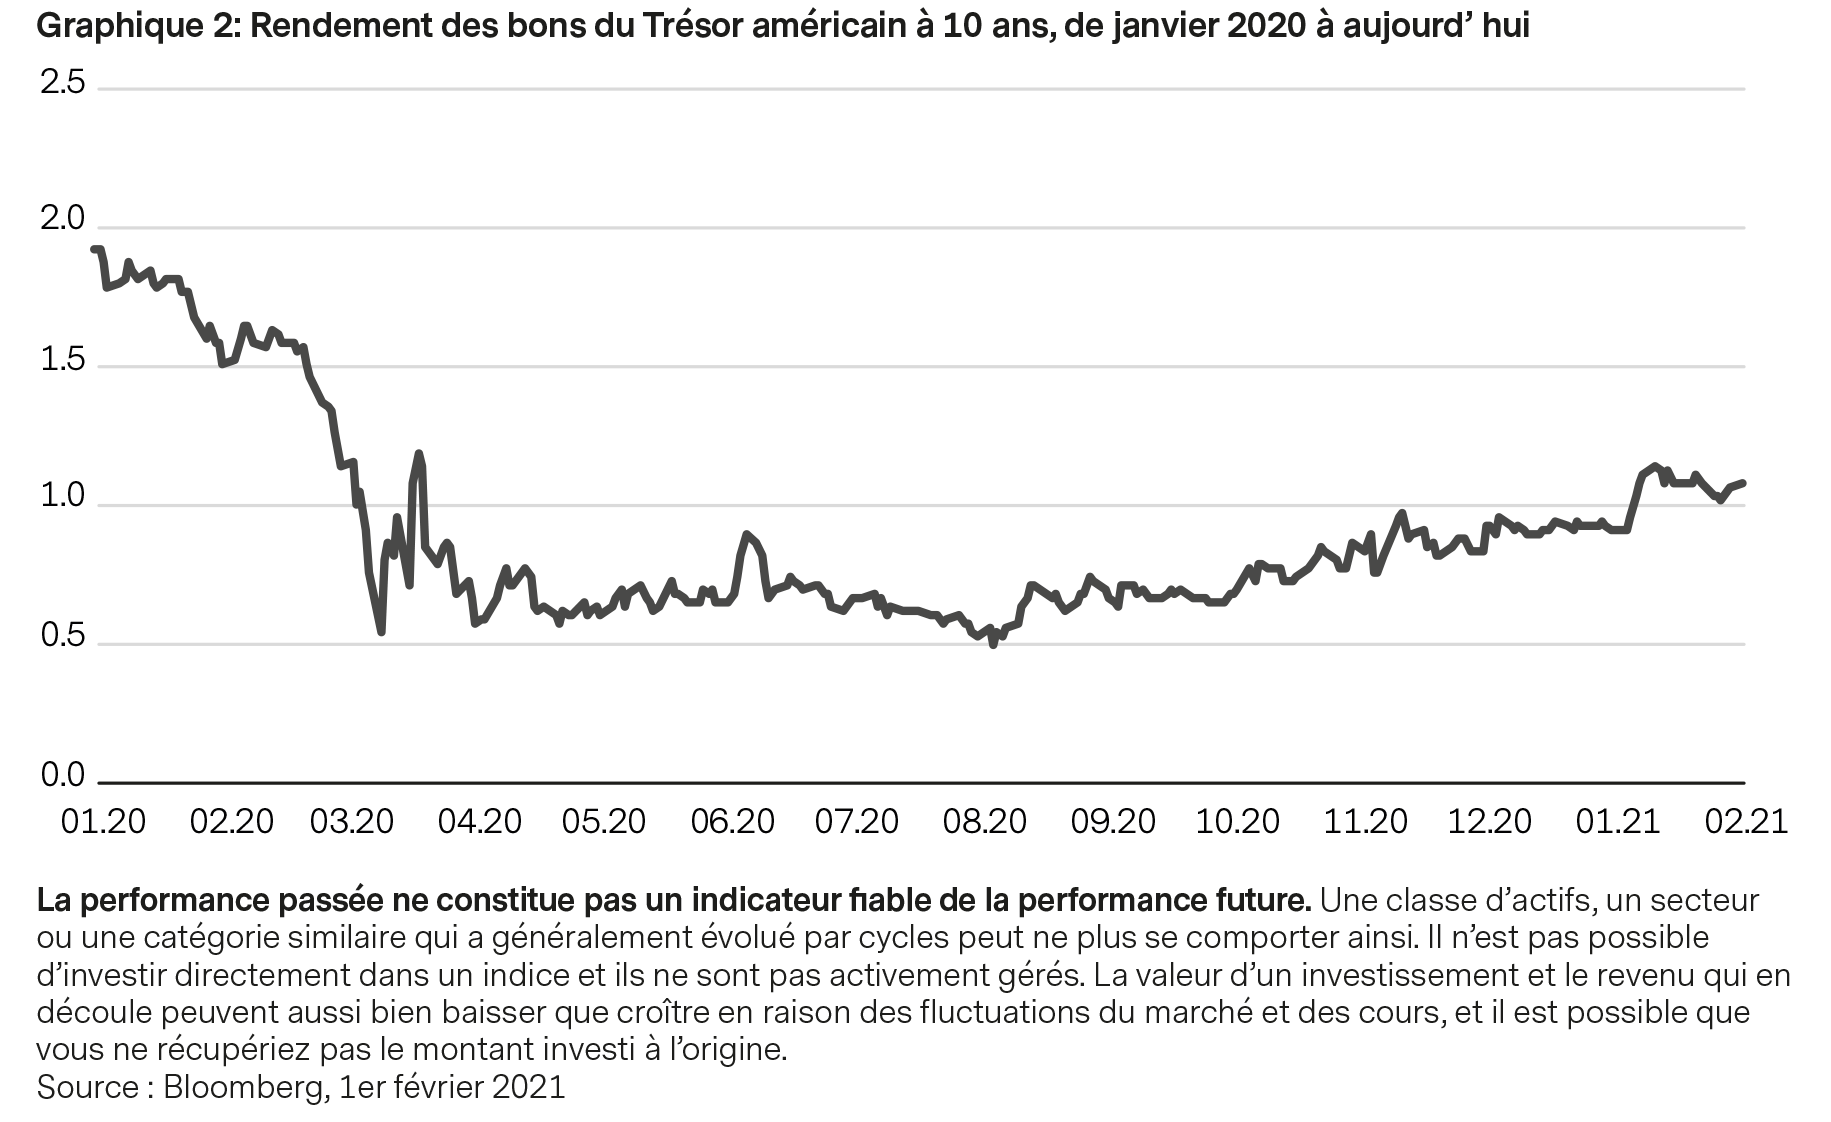 2021-02-09-FI-Are-Fixed-Income-Bets-All-Pointing-the-Same-Way_Chart2_FR